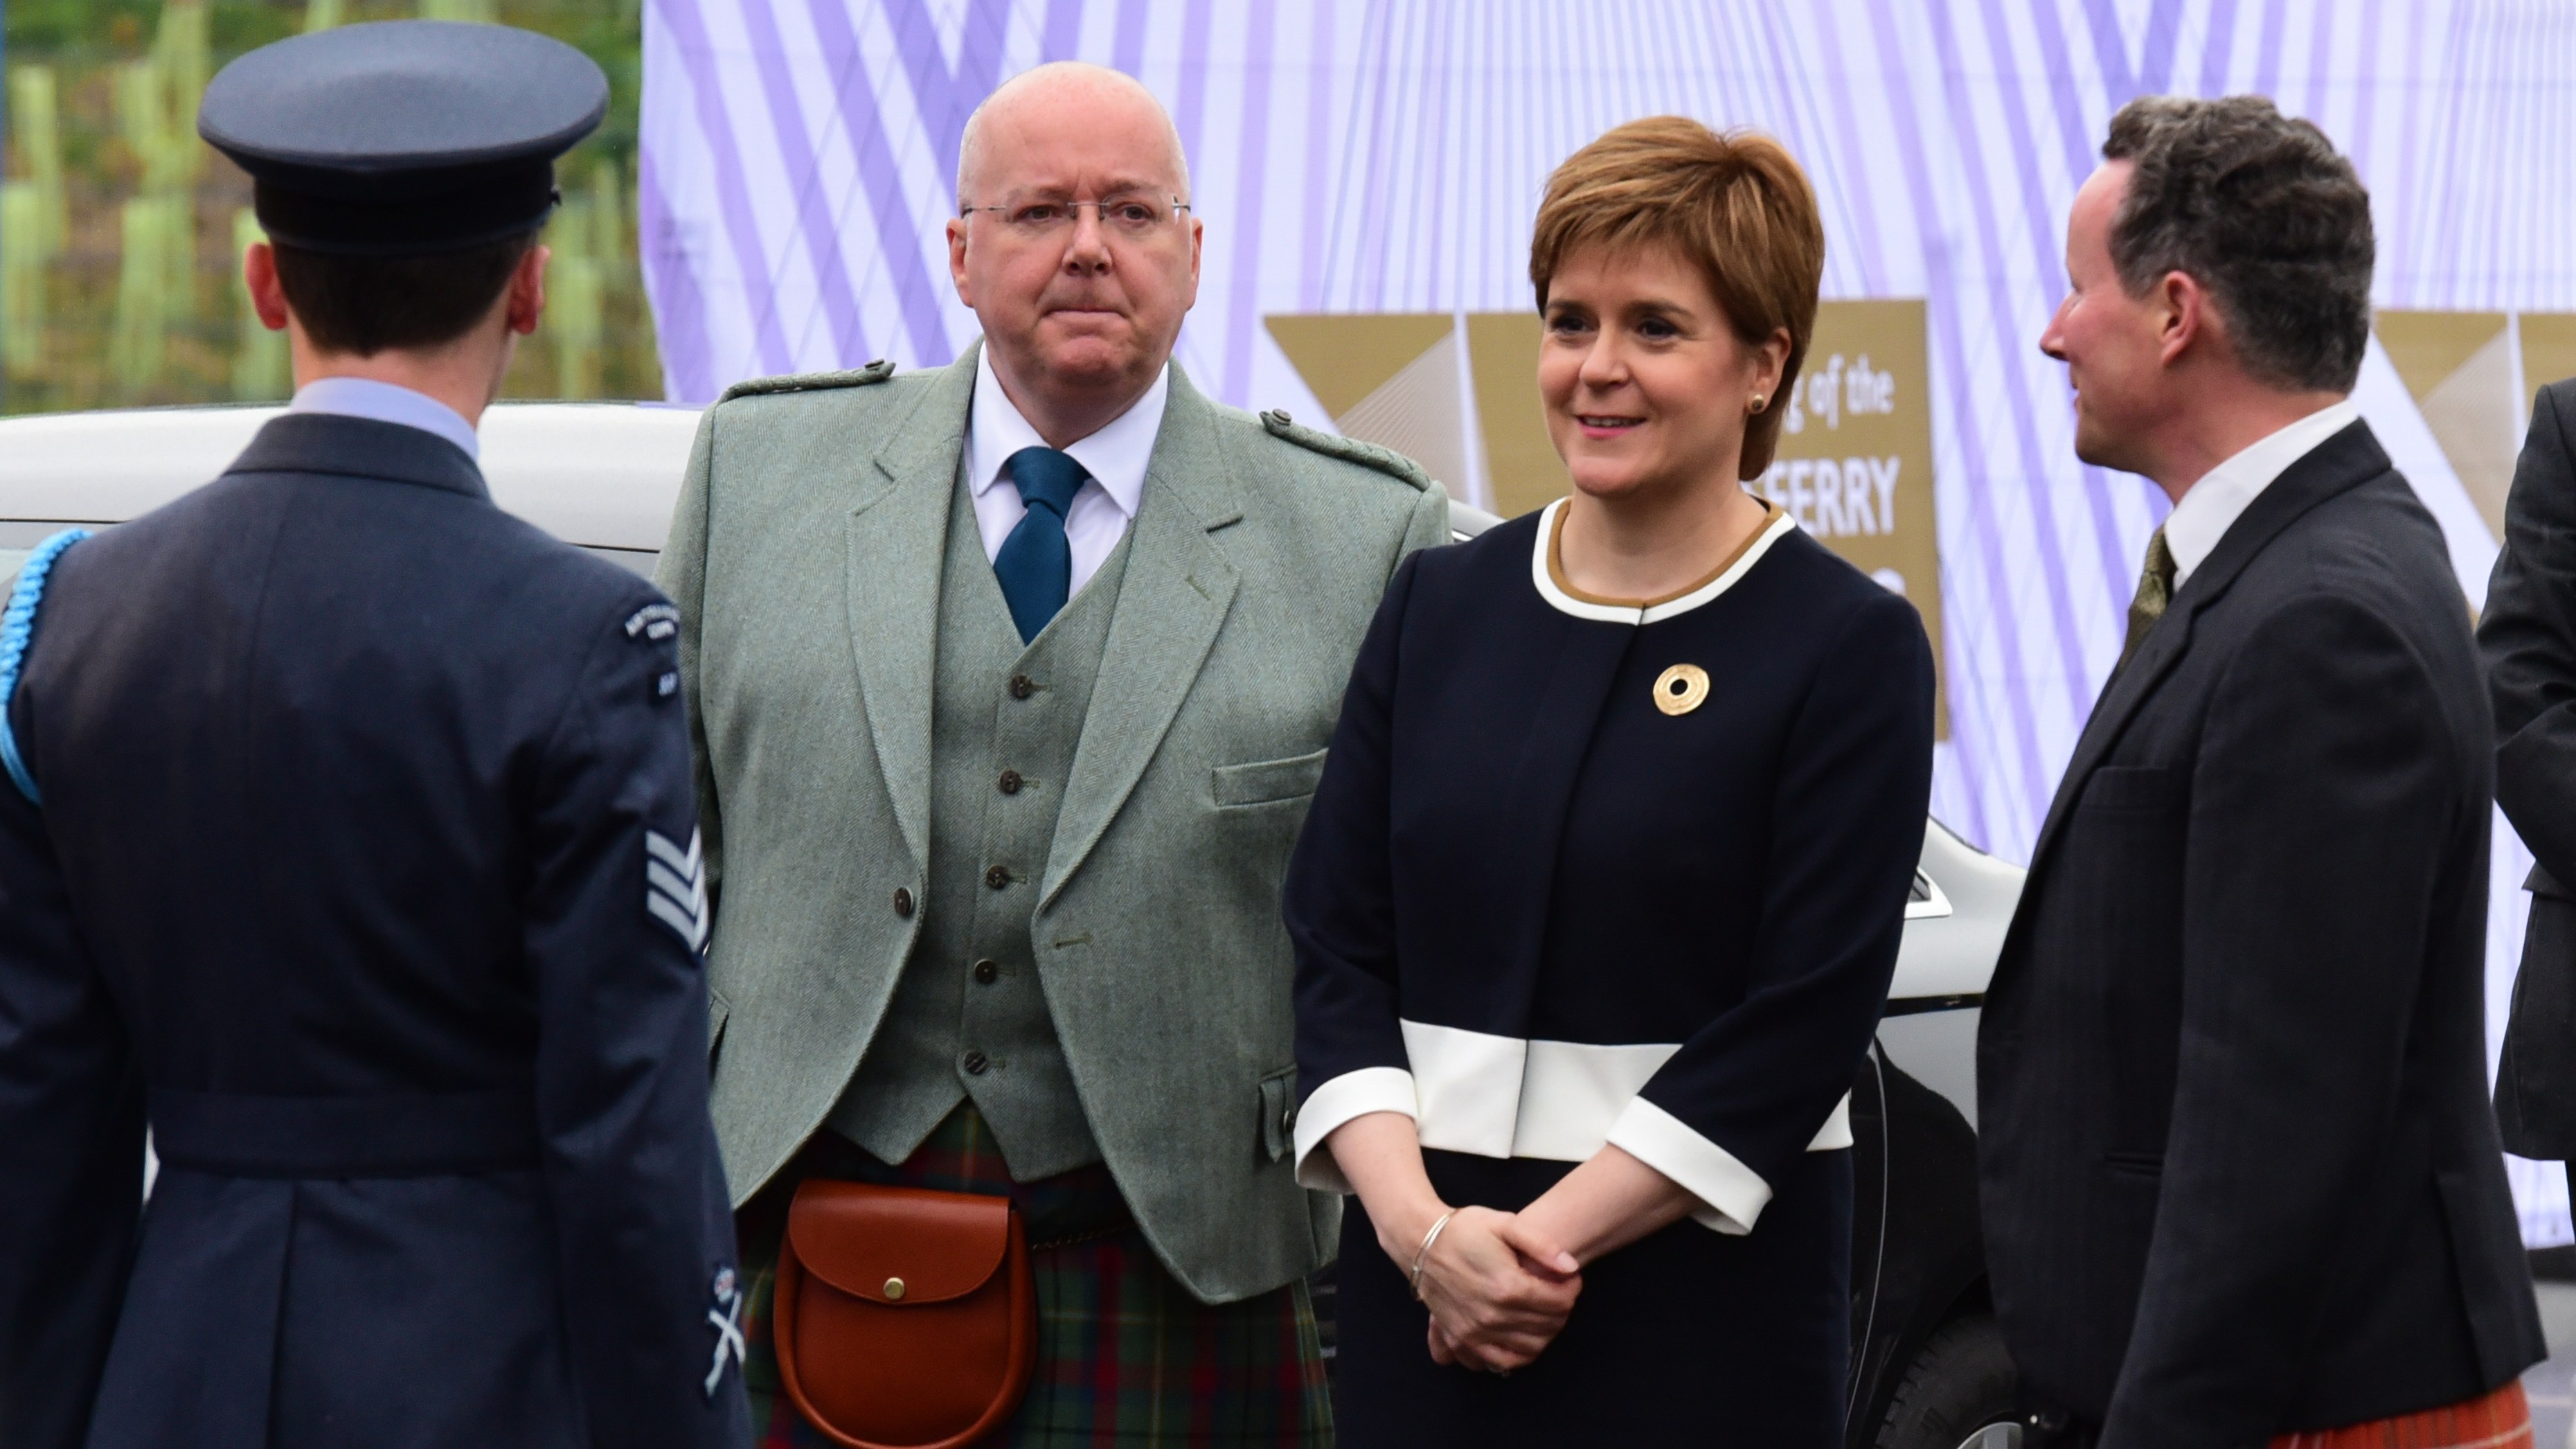 Peter Murrell at an event with his wife, Nicola Sturgeon, when she was first minister. Murrell was charged last Thursday after nine hours of questioning